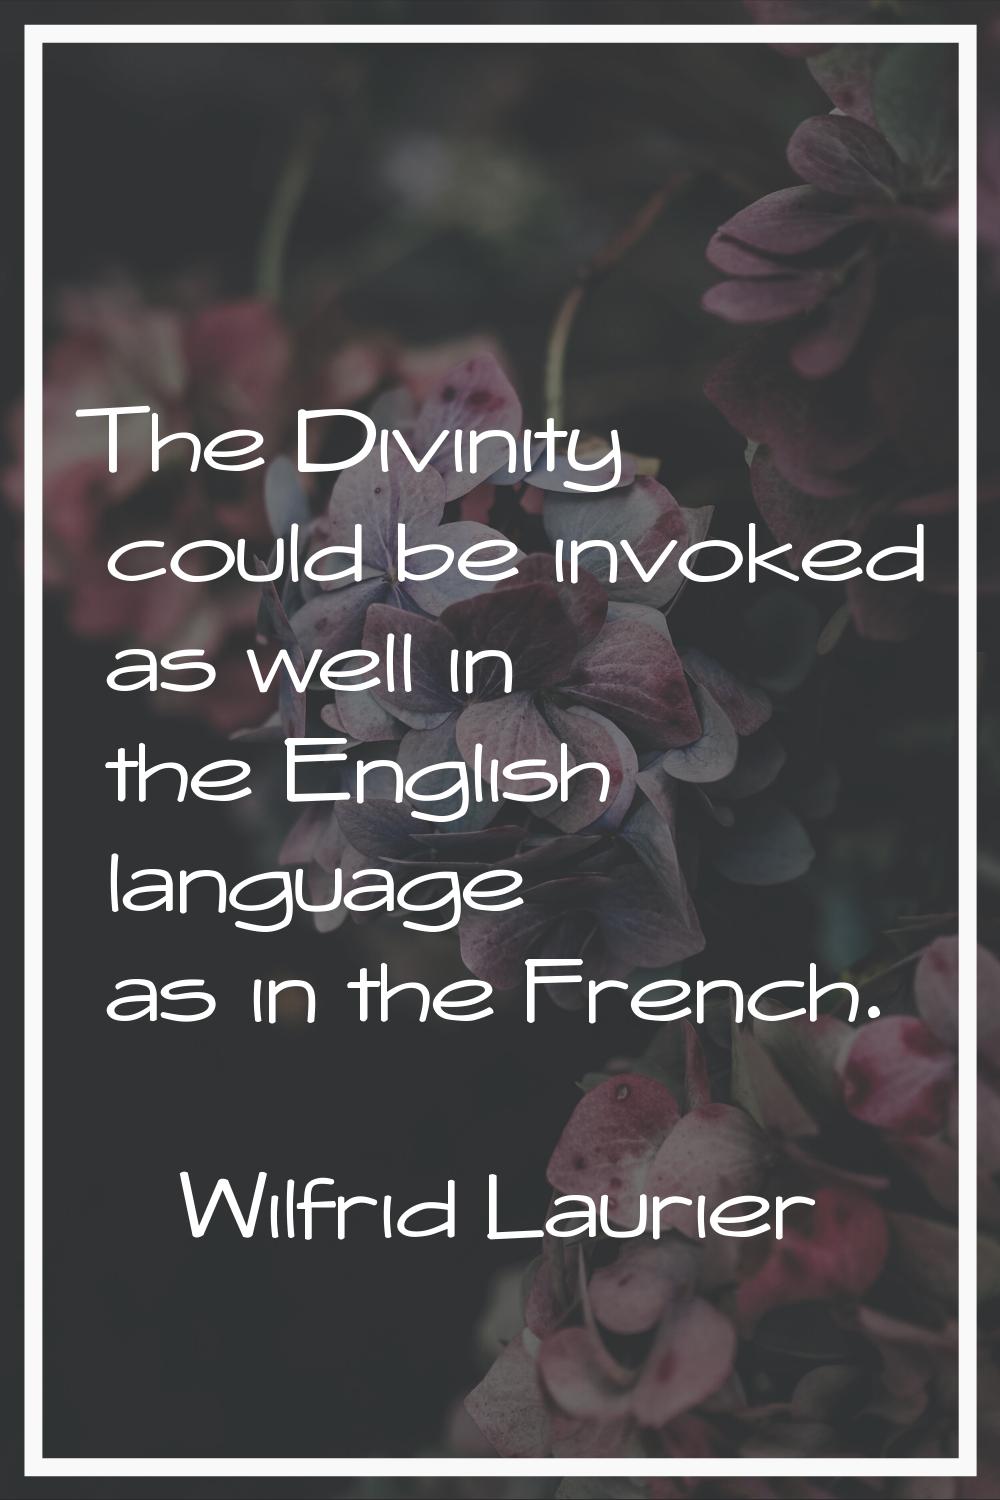 The Divinity could be invoked as well in the English language as in the French.